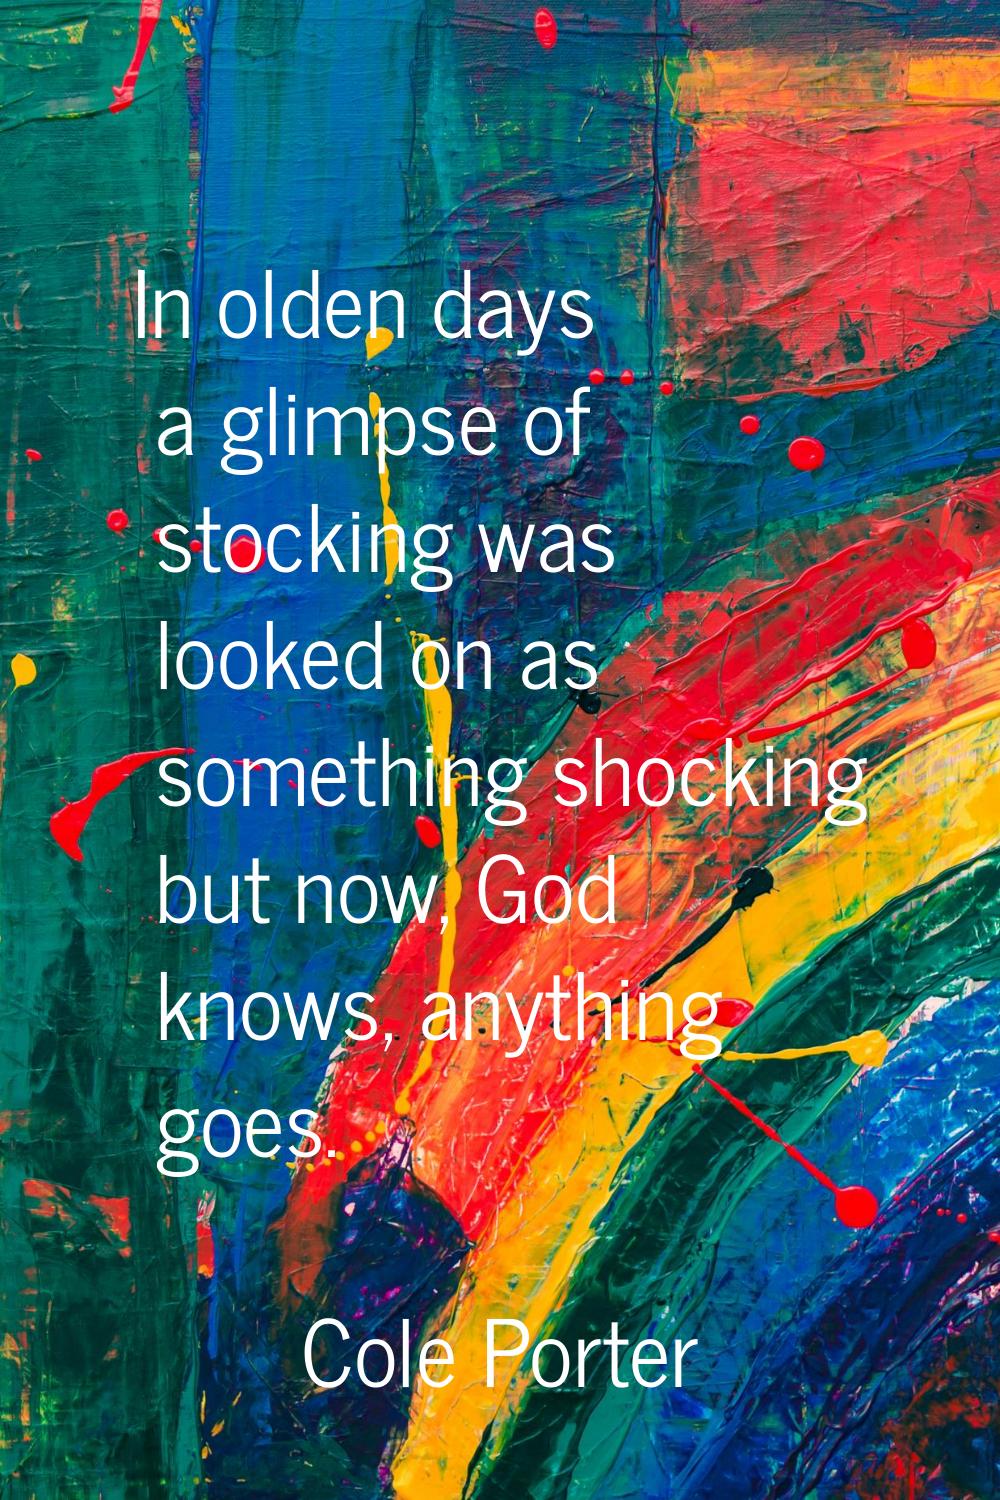 In olden days a glimpse of stocking was looked on as something shocking but now, God knows, anythin